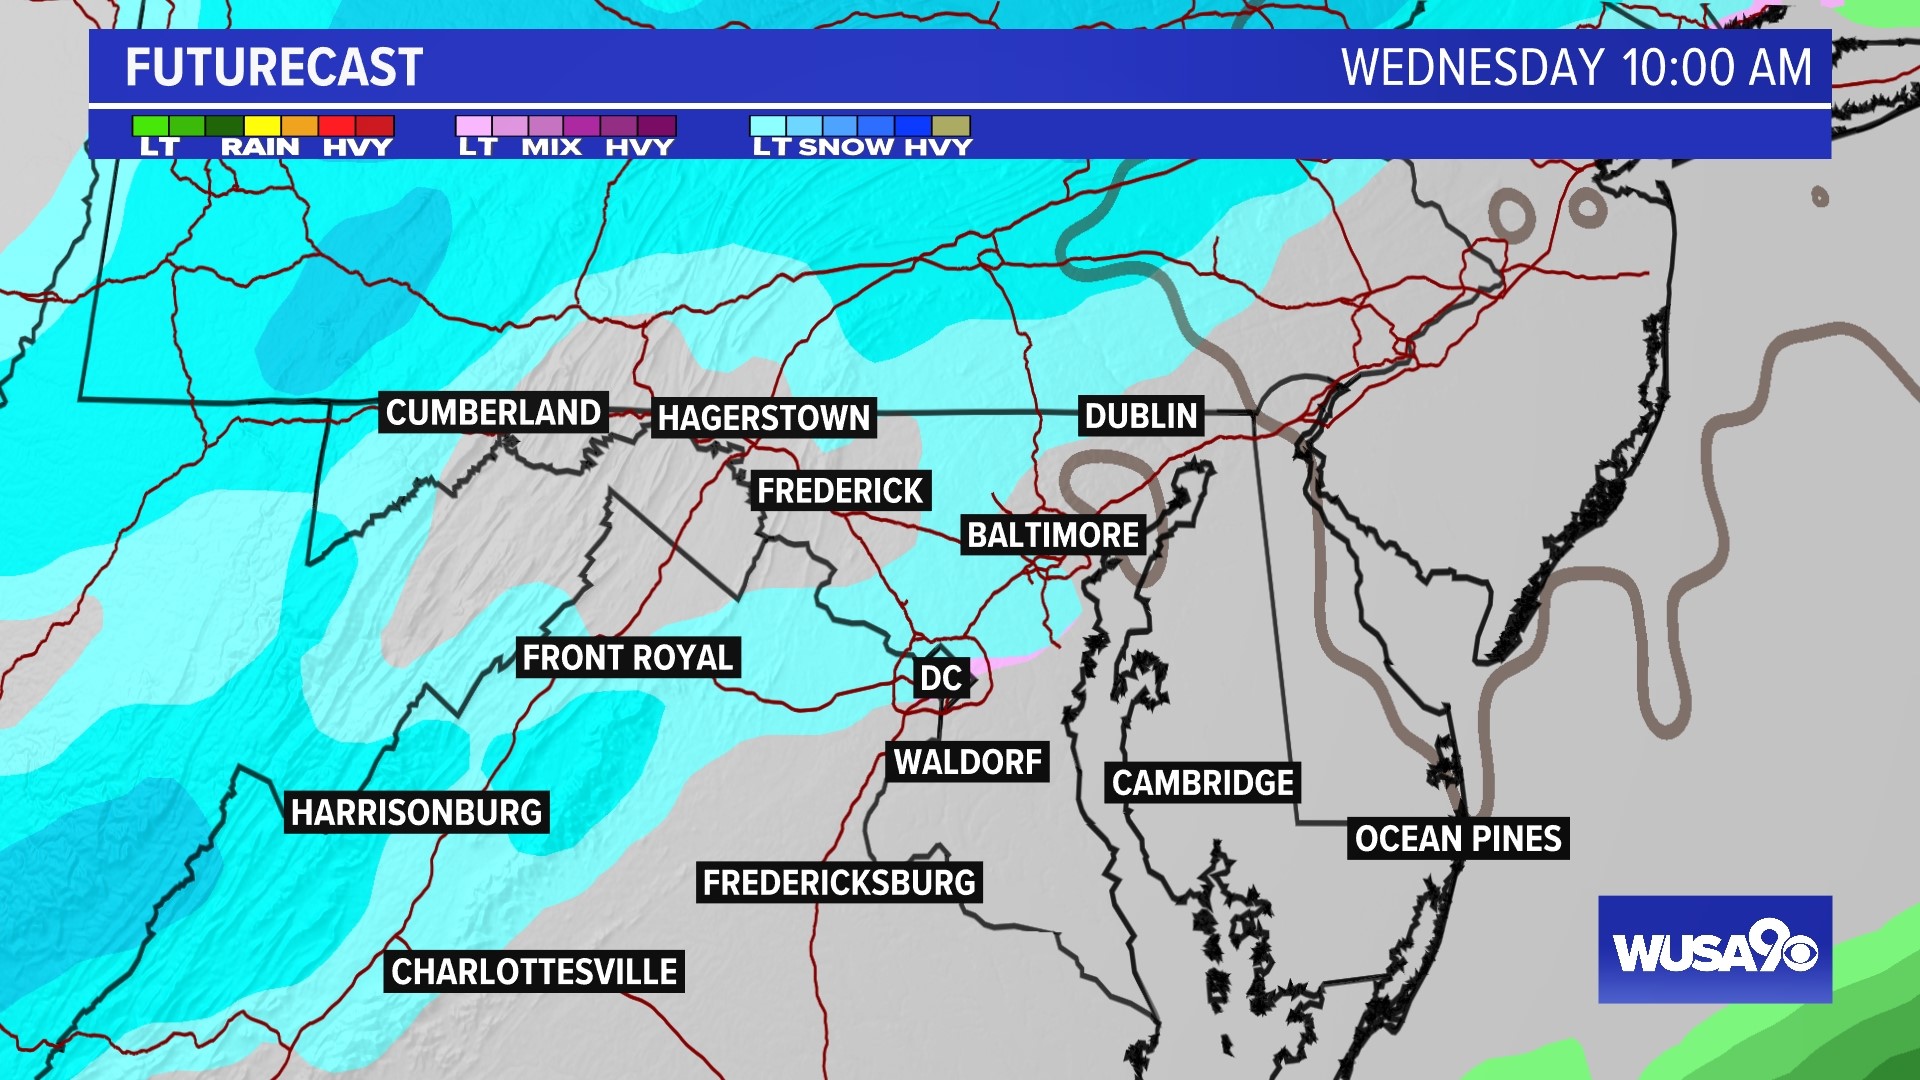 Expect light snow for most of the DMV by the time you're waking up Wednesday morning